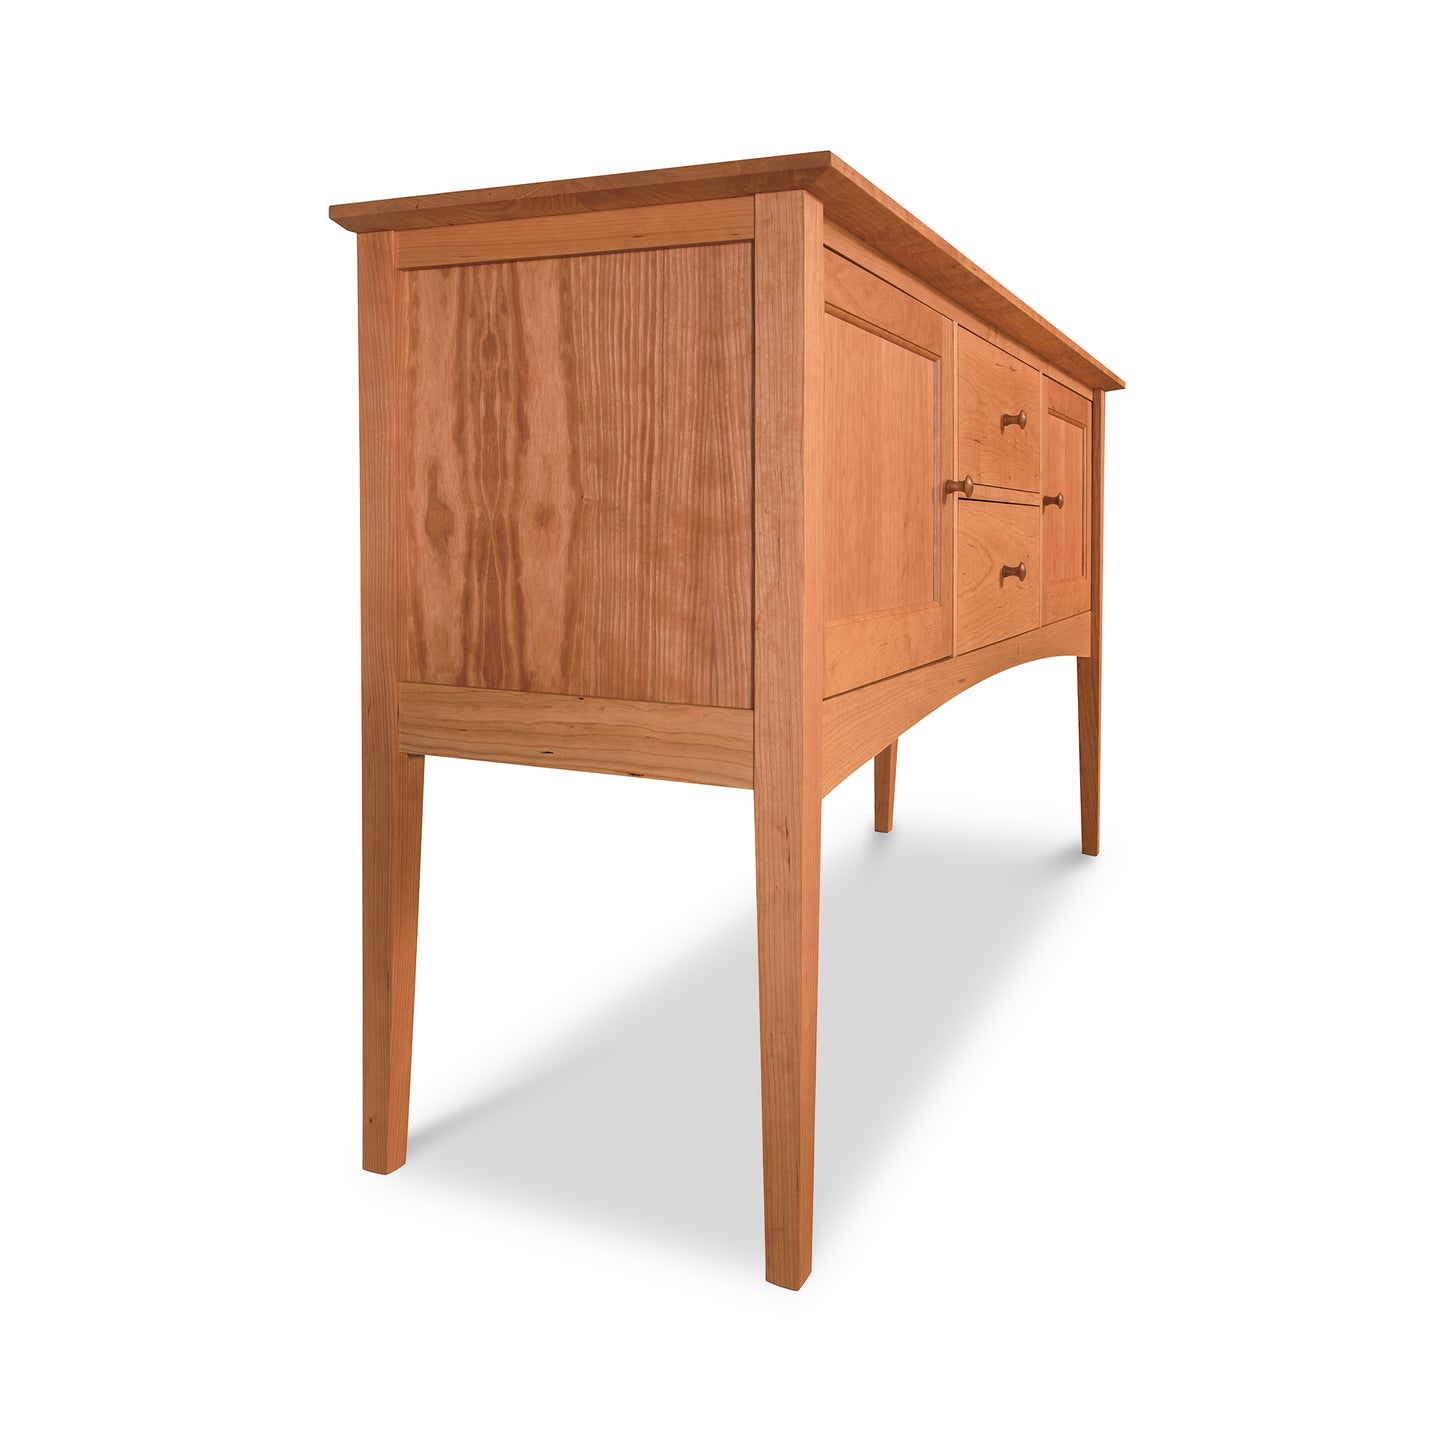 The Maple Corner Woodworks American Shaker Hunt Board is a beautifully crafted wooden sideboard with two drawers and two doors, showcasing impeccable Vermont craftsmanship. Perfect as a buffet or sideboard for any home.